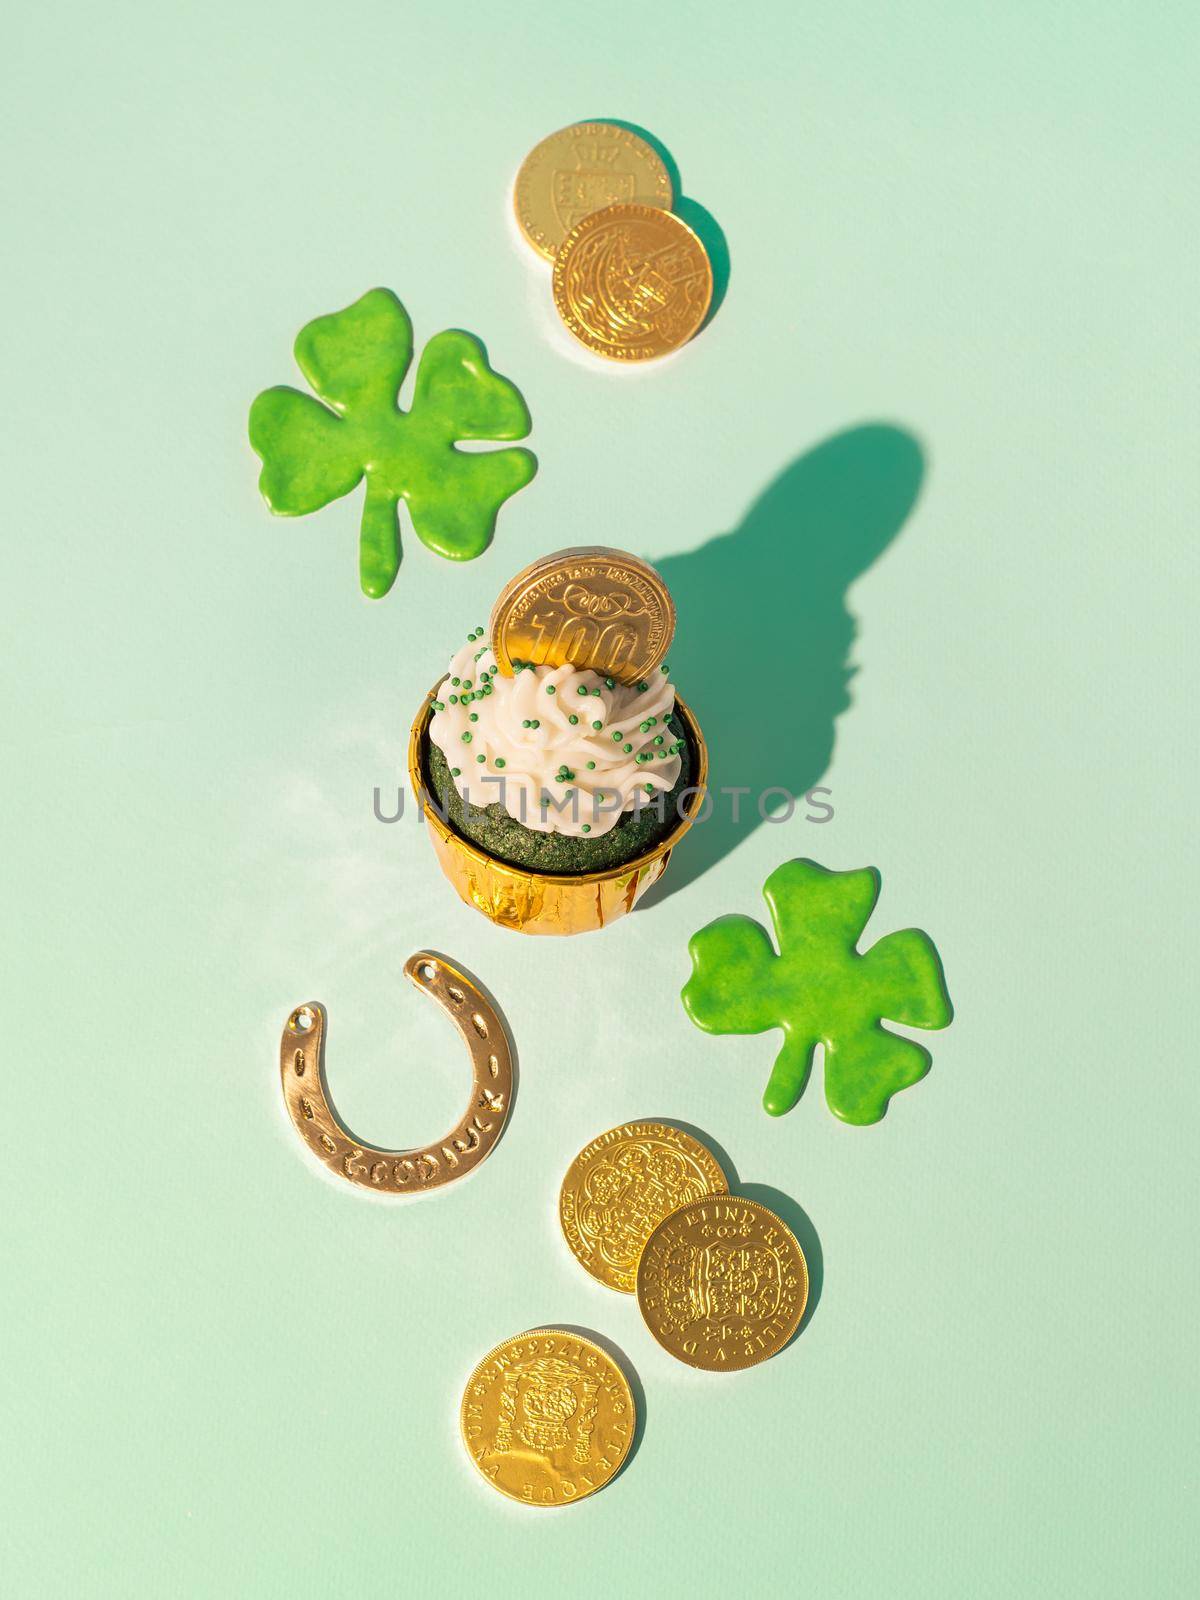 St Patrick's Day concept. Modern still life with lucky symbols and sweet food for Saint Patrick's Day party. Green velvet cupckake, shamrock, golden coins and horseshoe on green background. Vertical